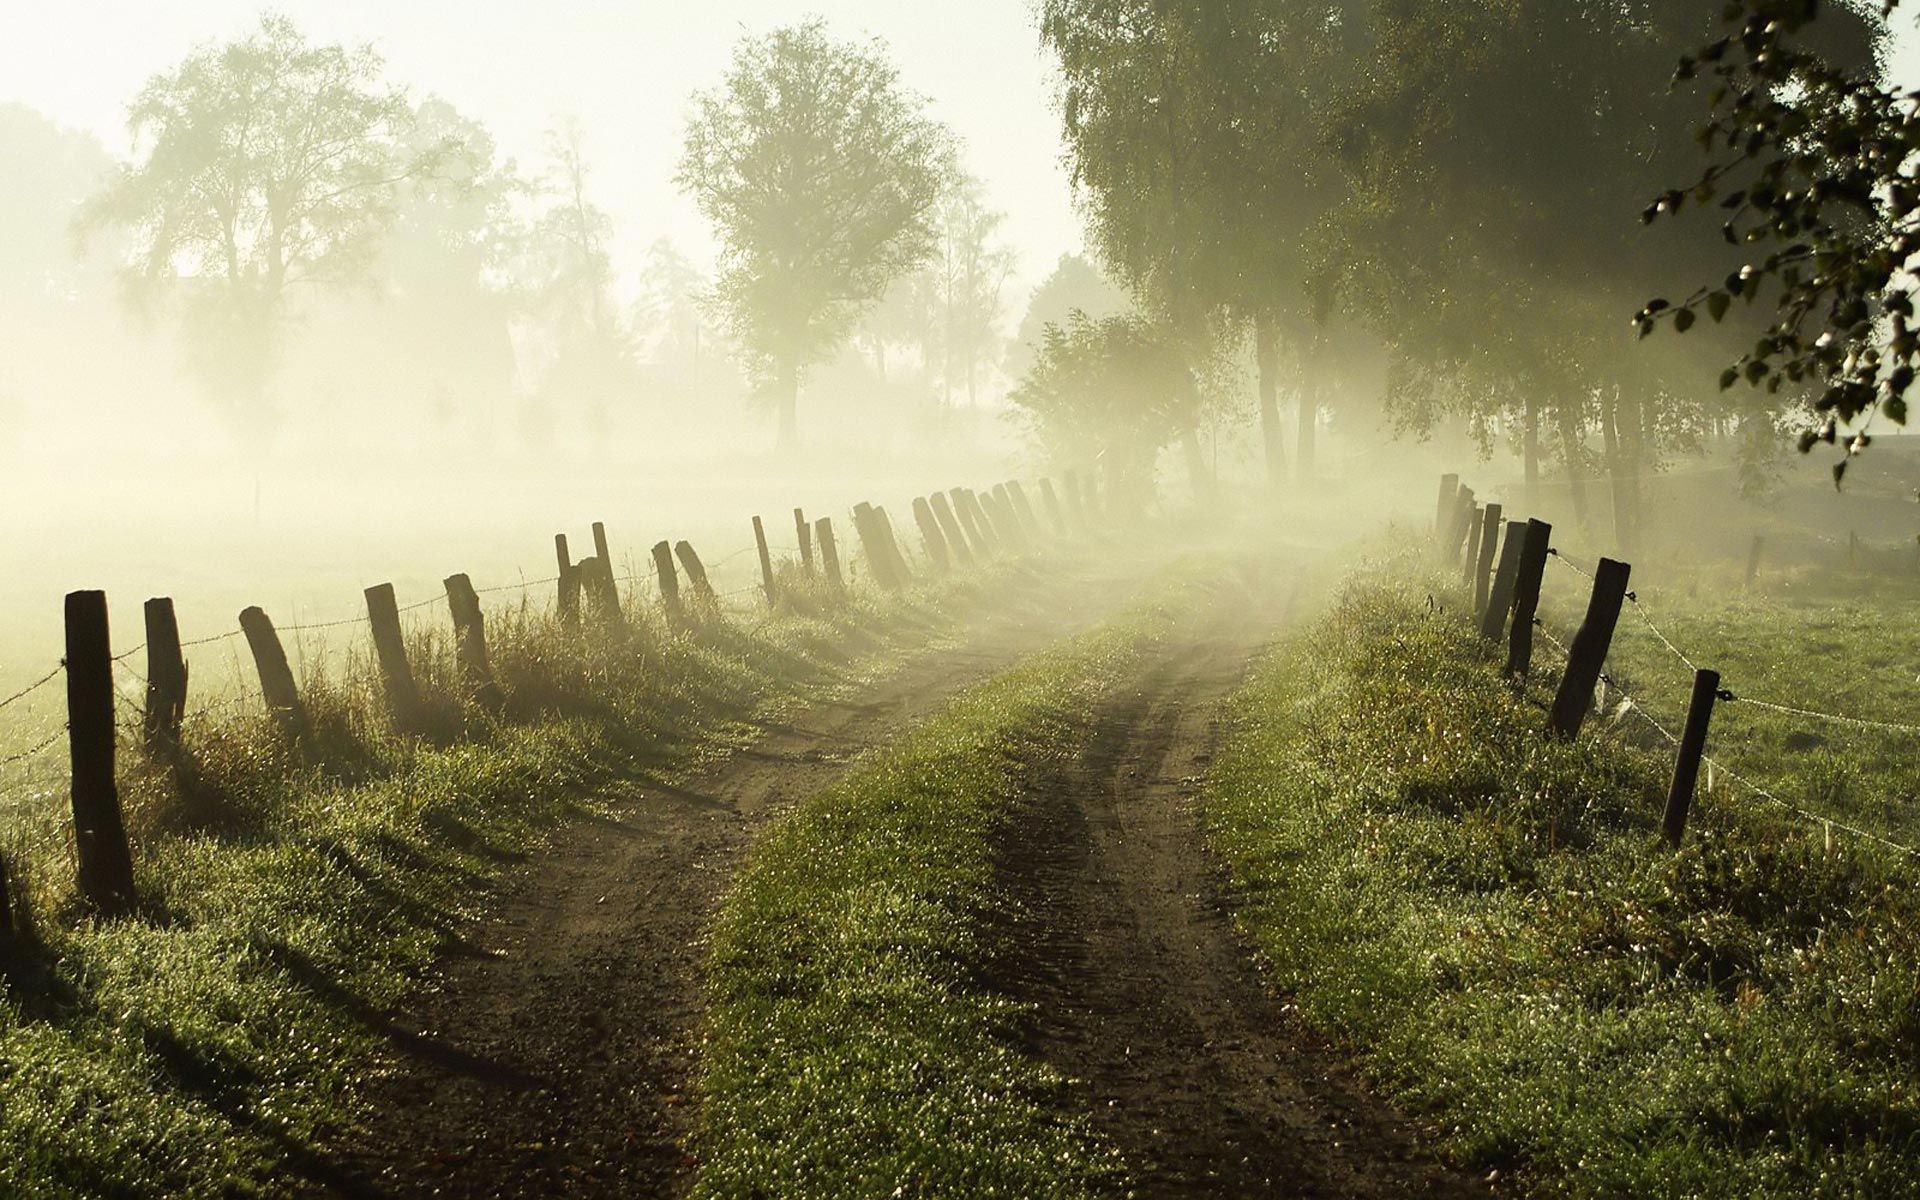 Foggy #morning, beautiful #nature shot, #road to somewhere you can't see. #morning #photography #fog. Landscape, Nature, Country roads take me home